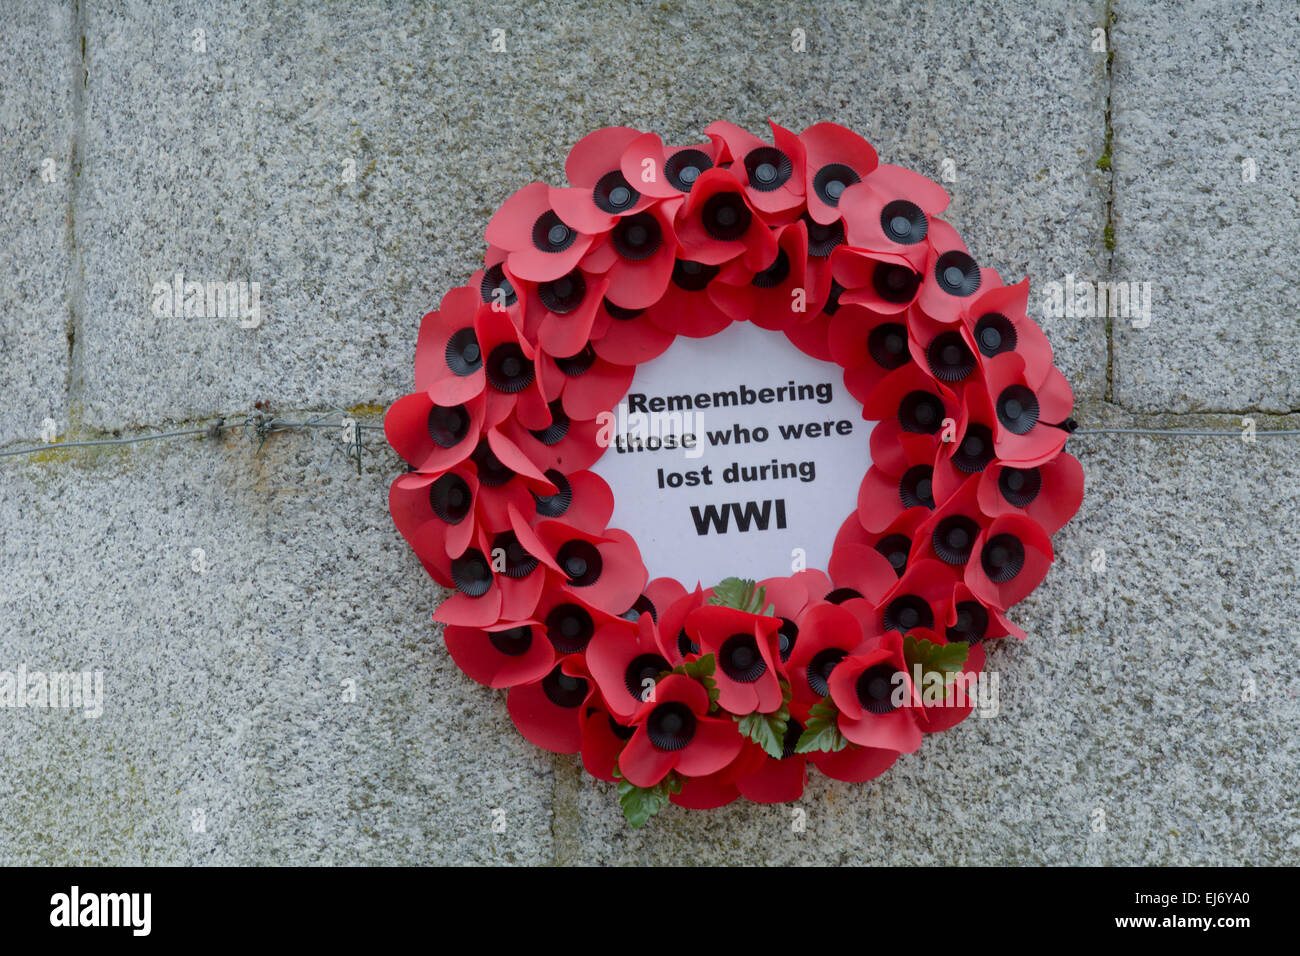 Poppy ring on remembrance for troops killed during World War One at war memorial in Launceston, Cornwall, England Stock Photo